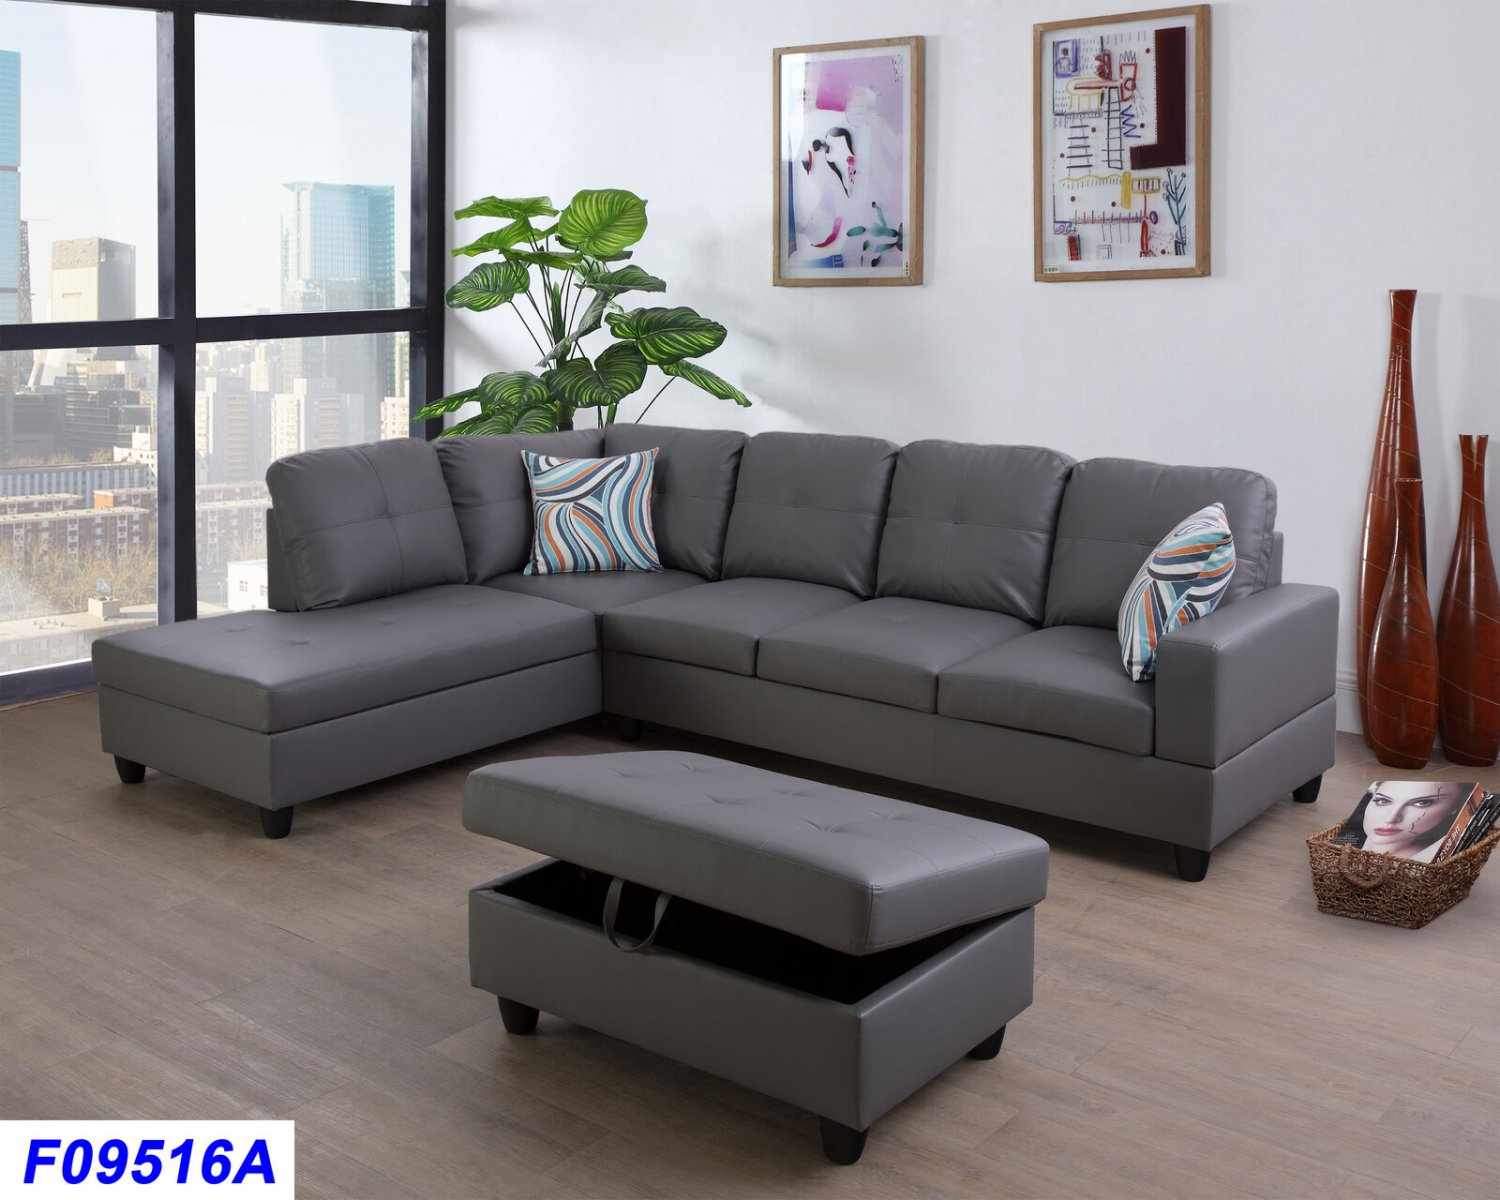 wellington faux leather sectional sofa with ottoman